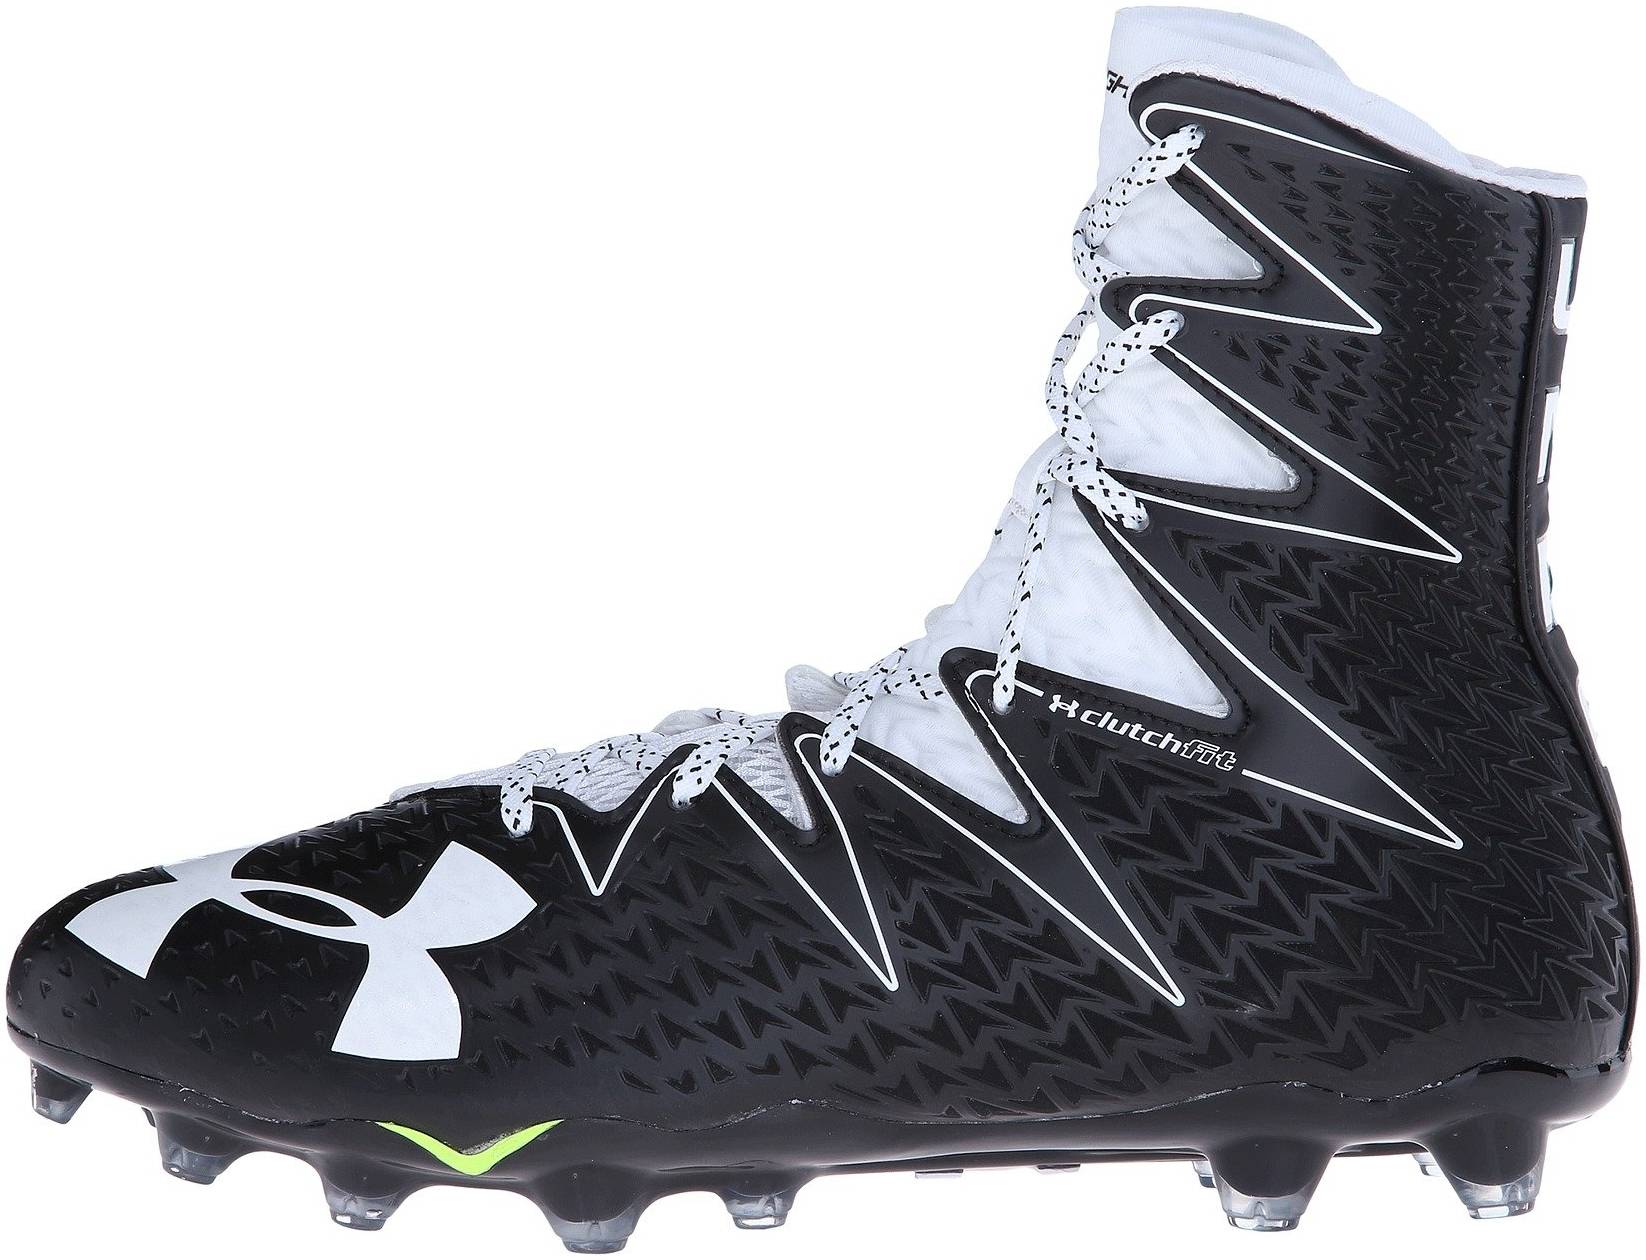 Save 63% on Football Cleats (42 Models 